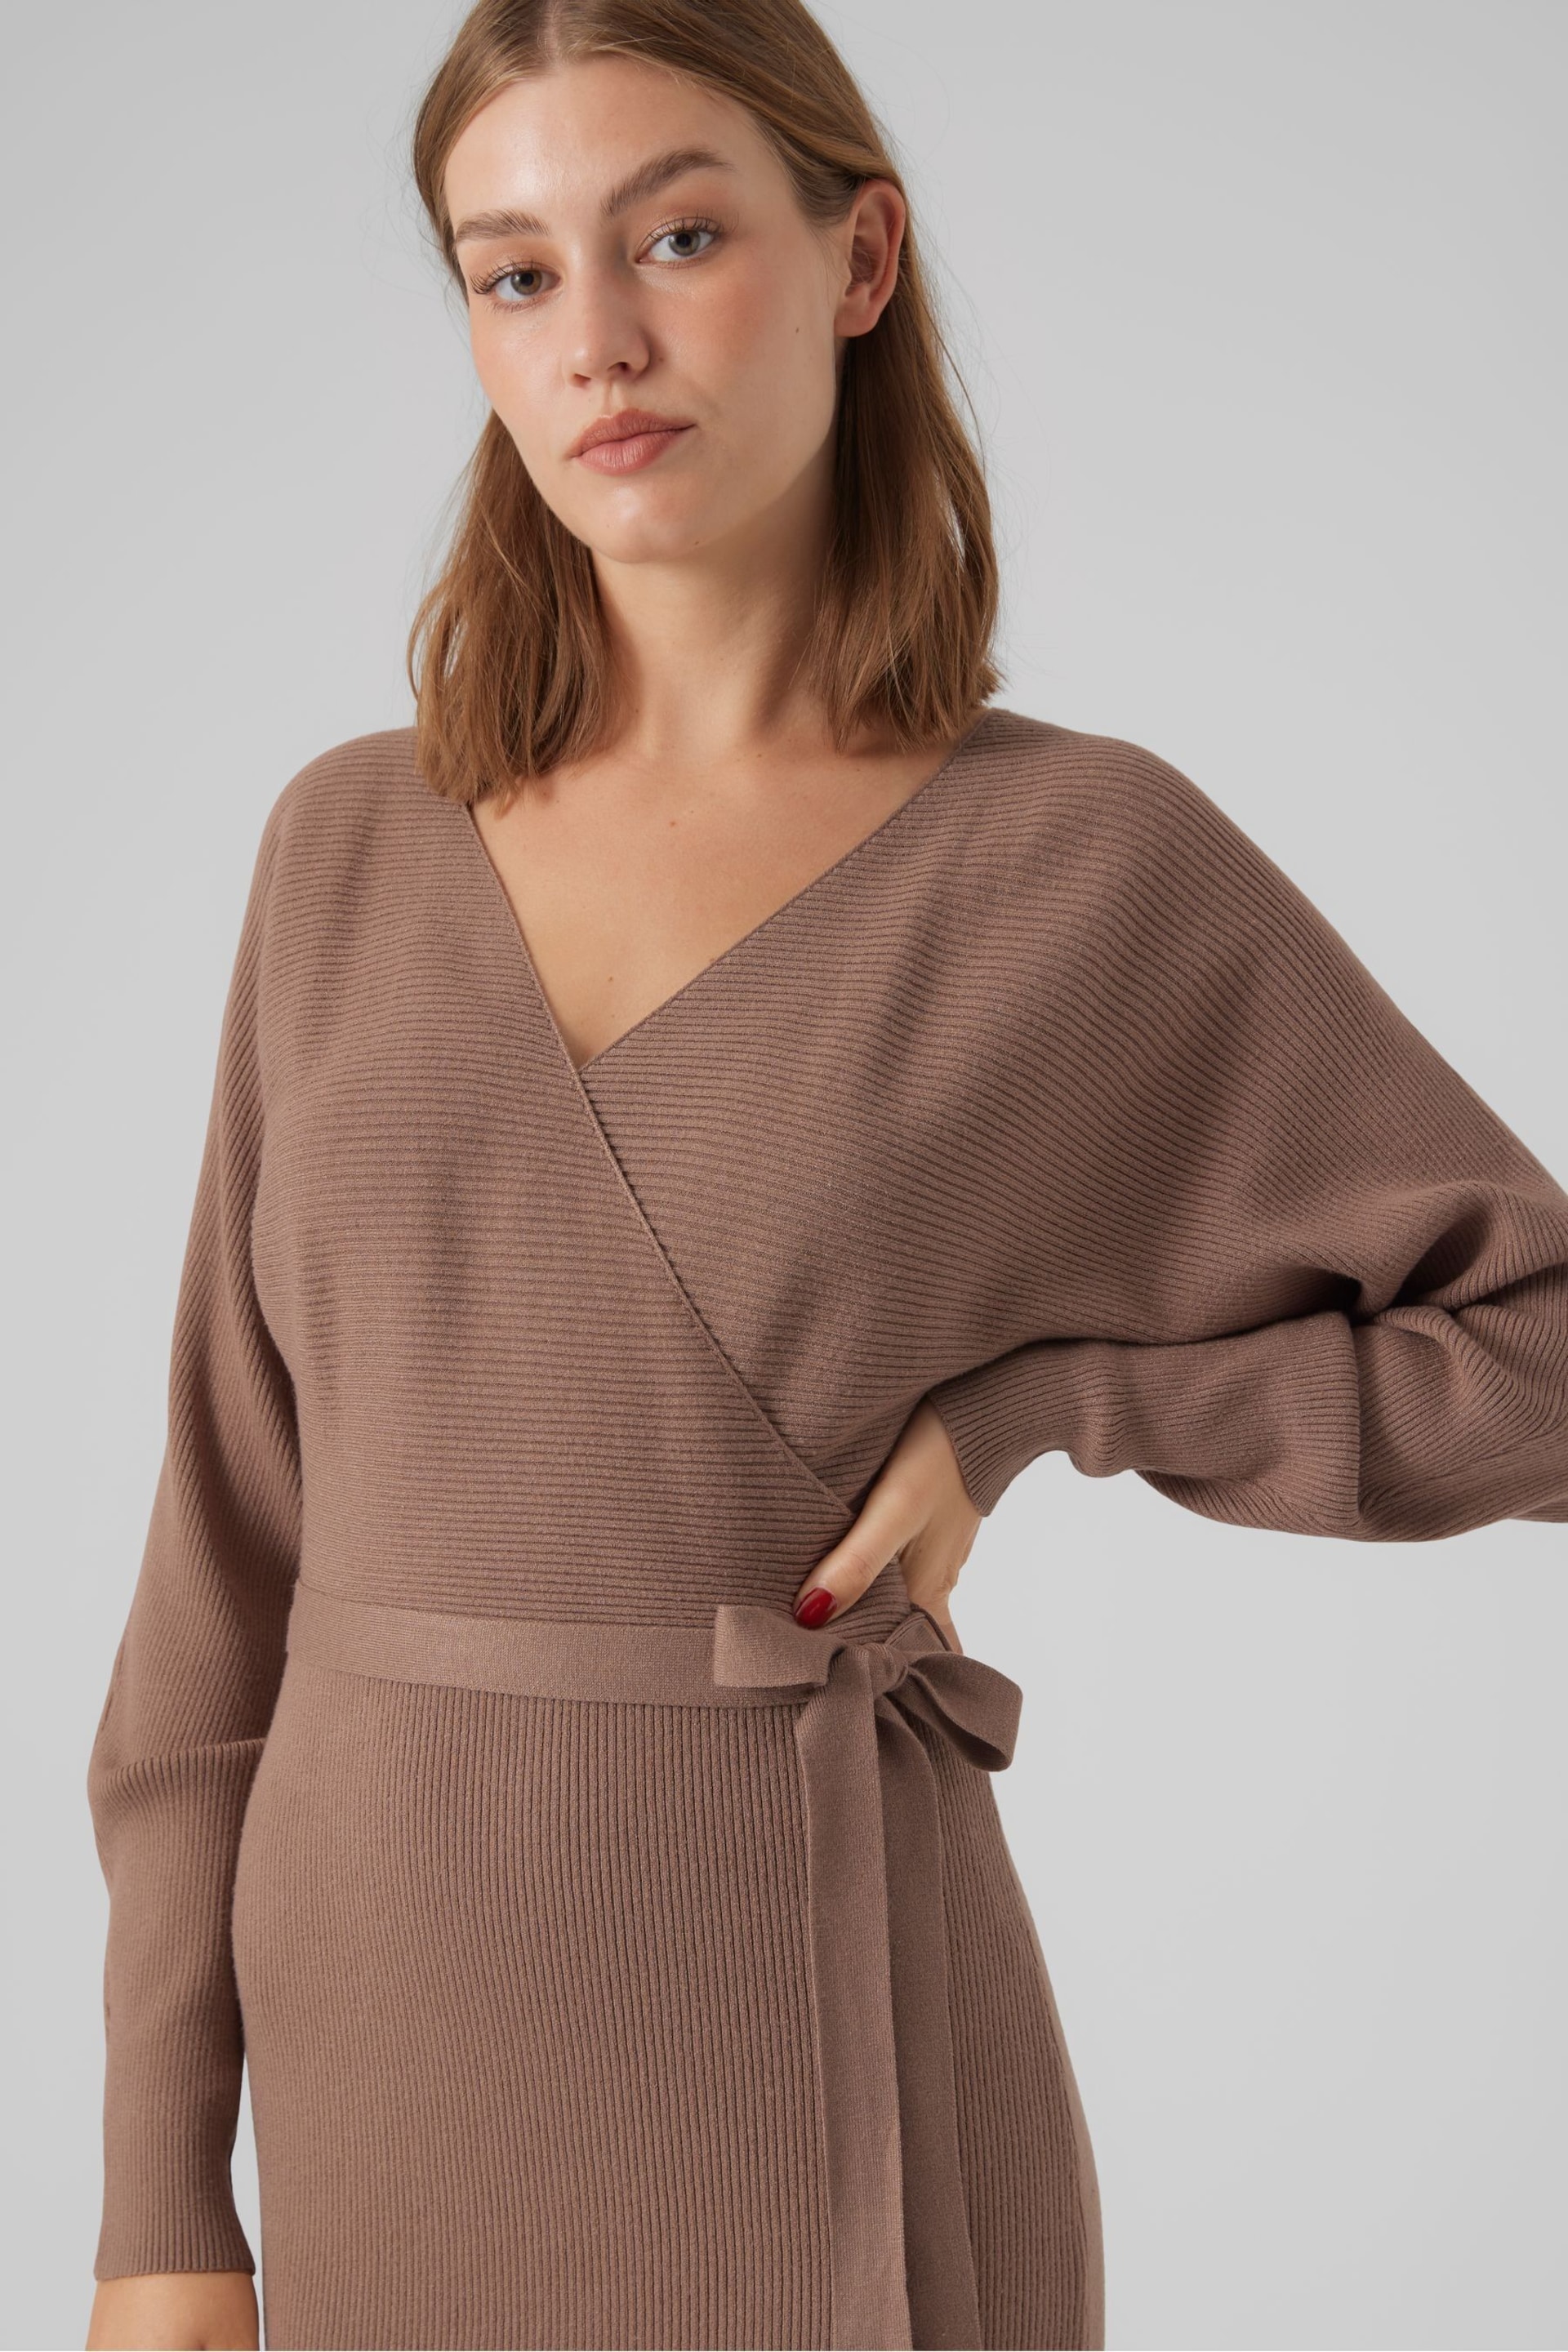 VERO MODA Brown V-Neck Wrap Belted Knitted Dress - Image 4 of 5